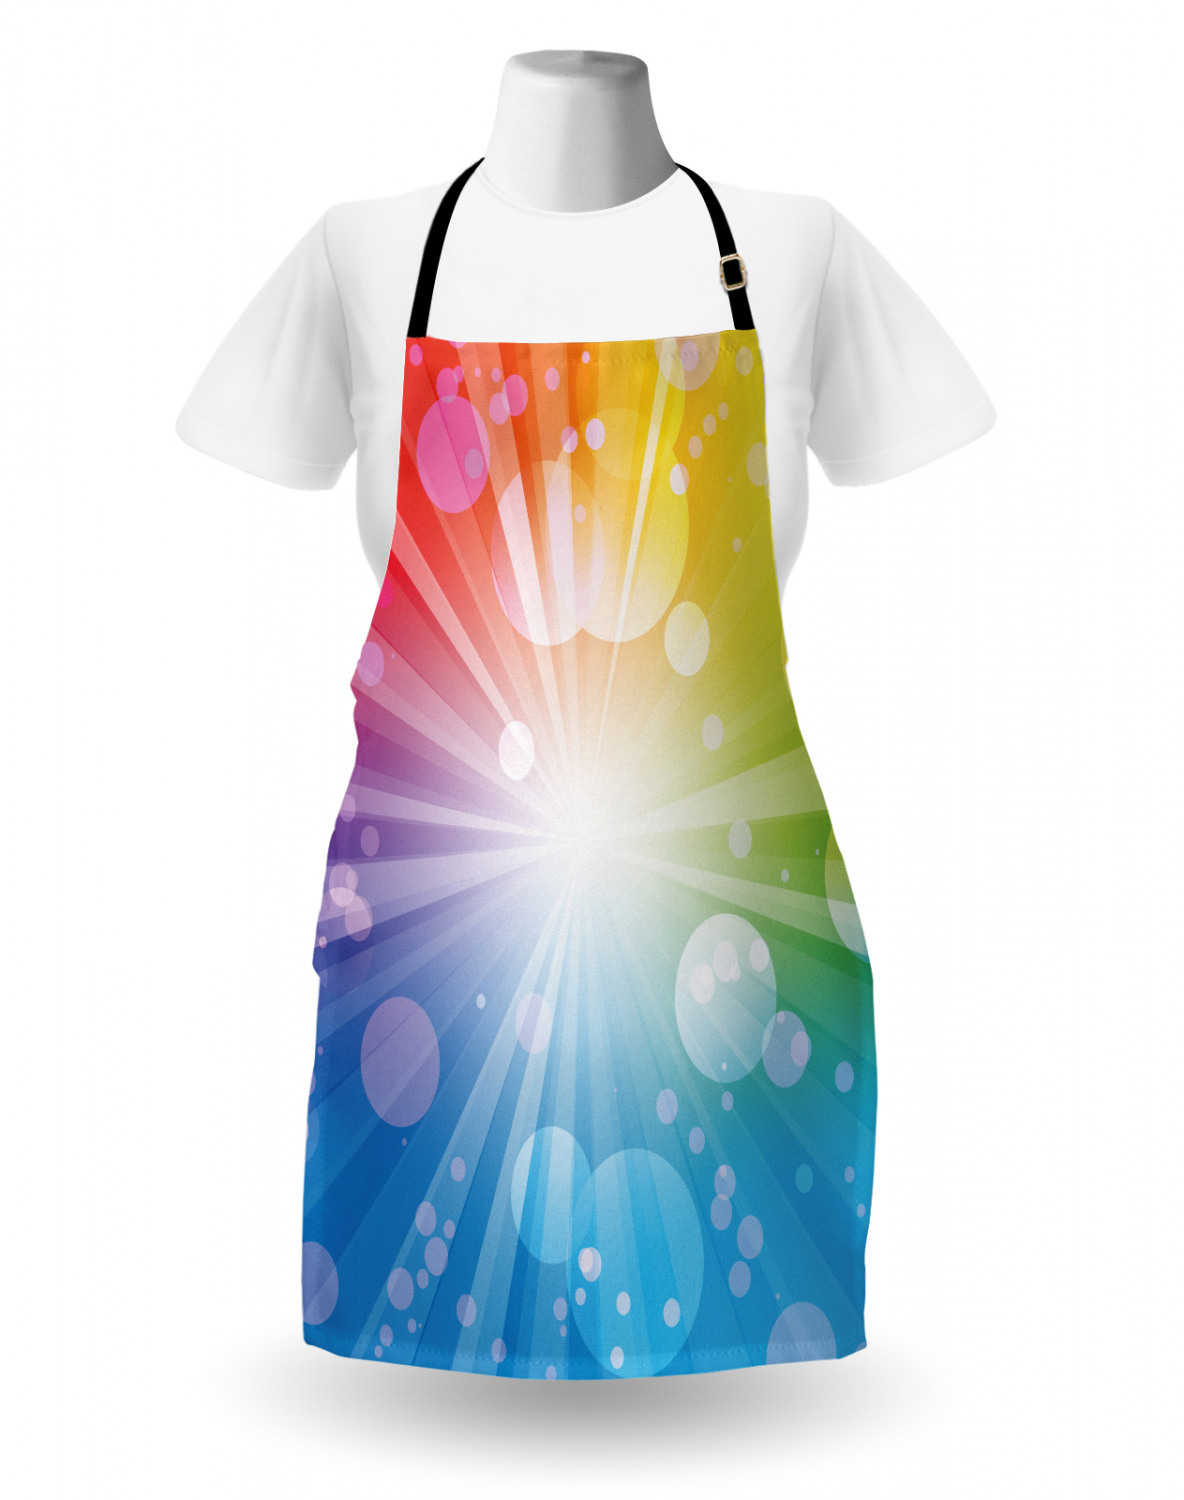 Ambesonne Unisex Standard Size Apron Adjustable Neck for Gardening and Cooking 